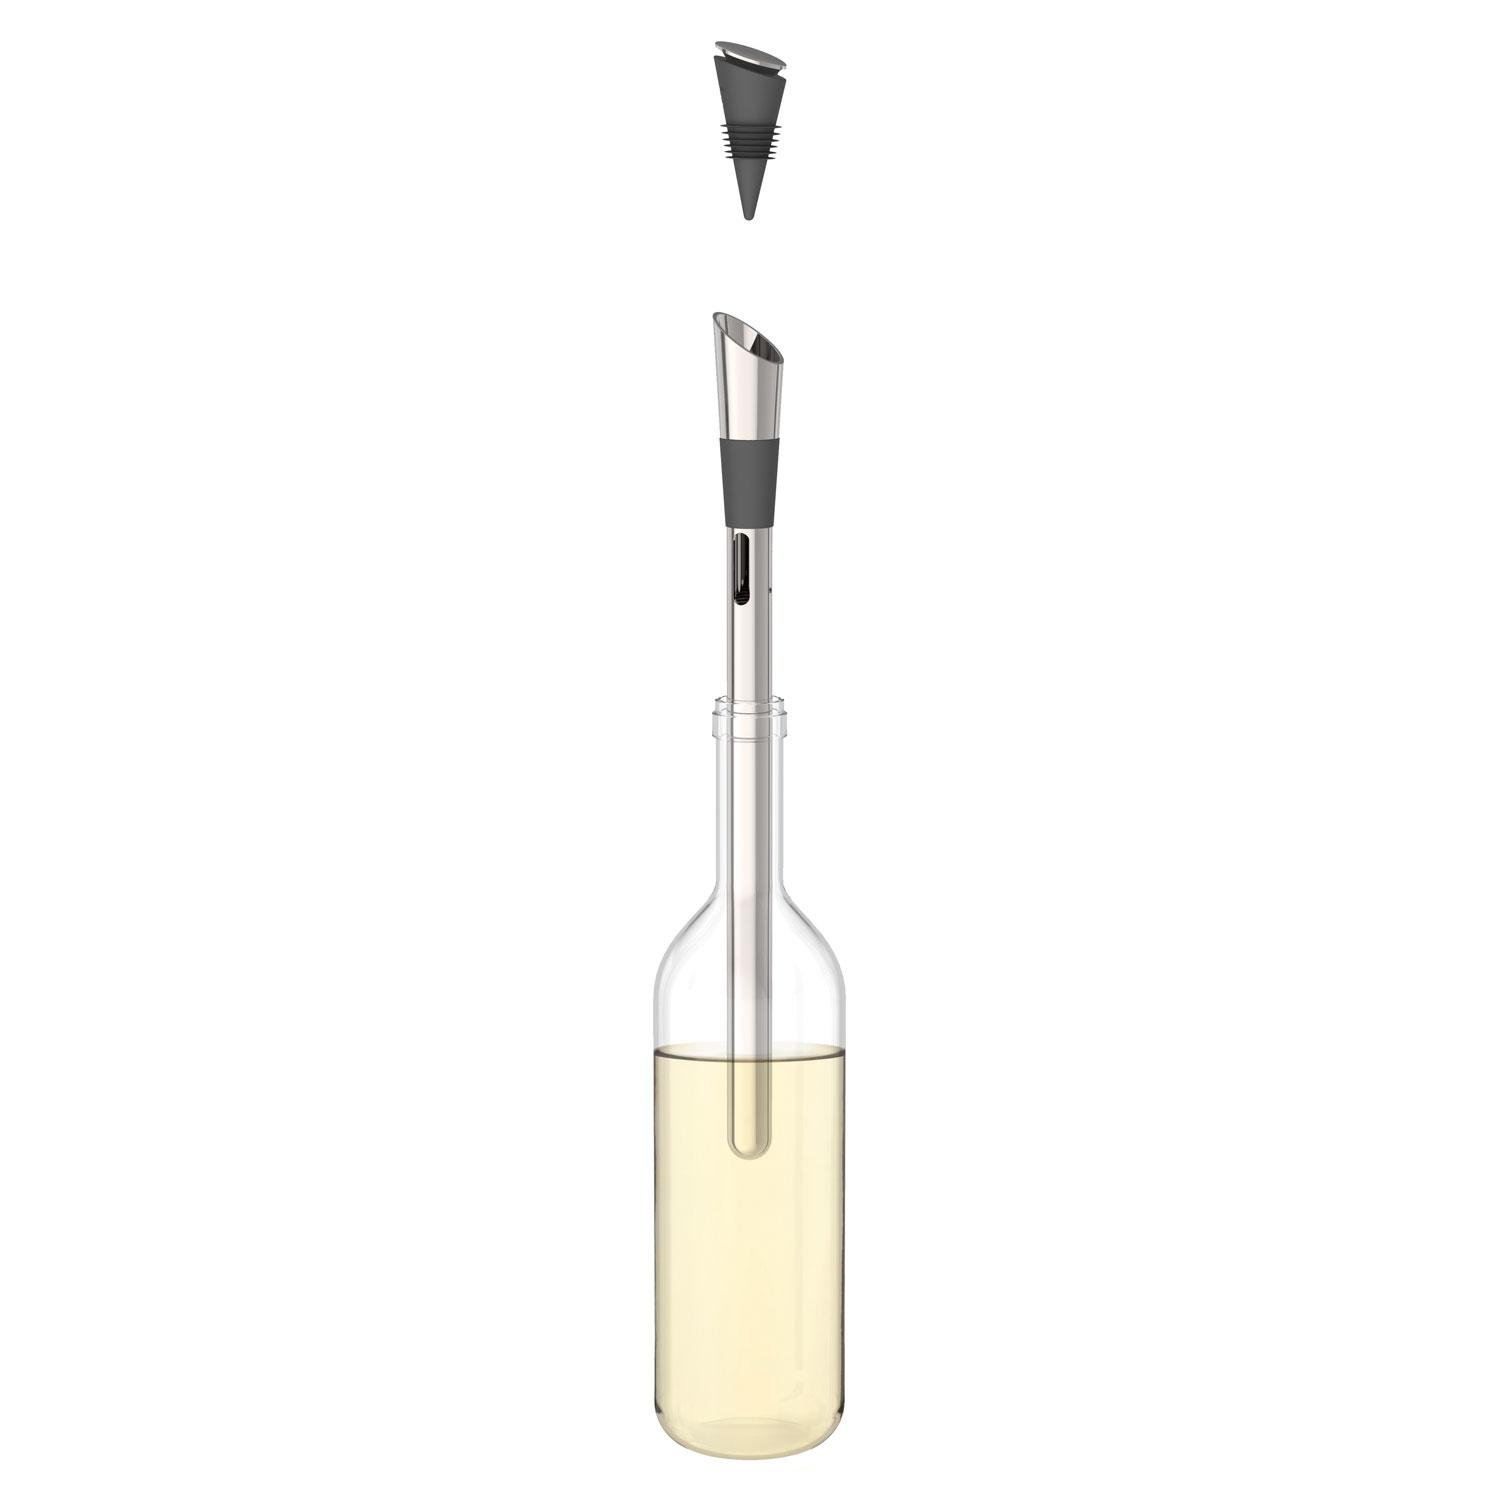 Uberstar Stainless Steel Wine Chill Stick - Only £19.99